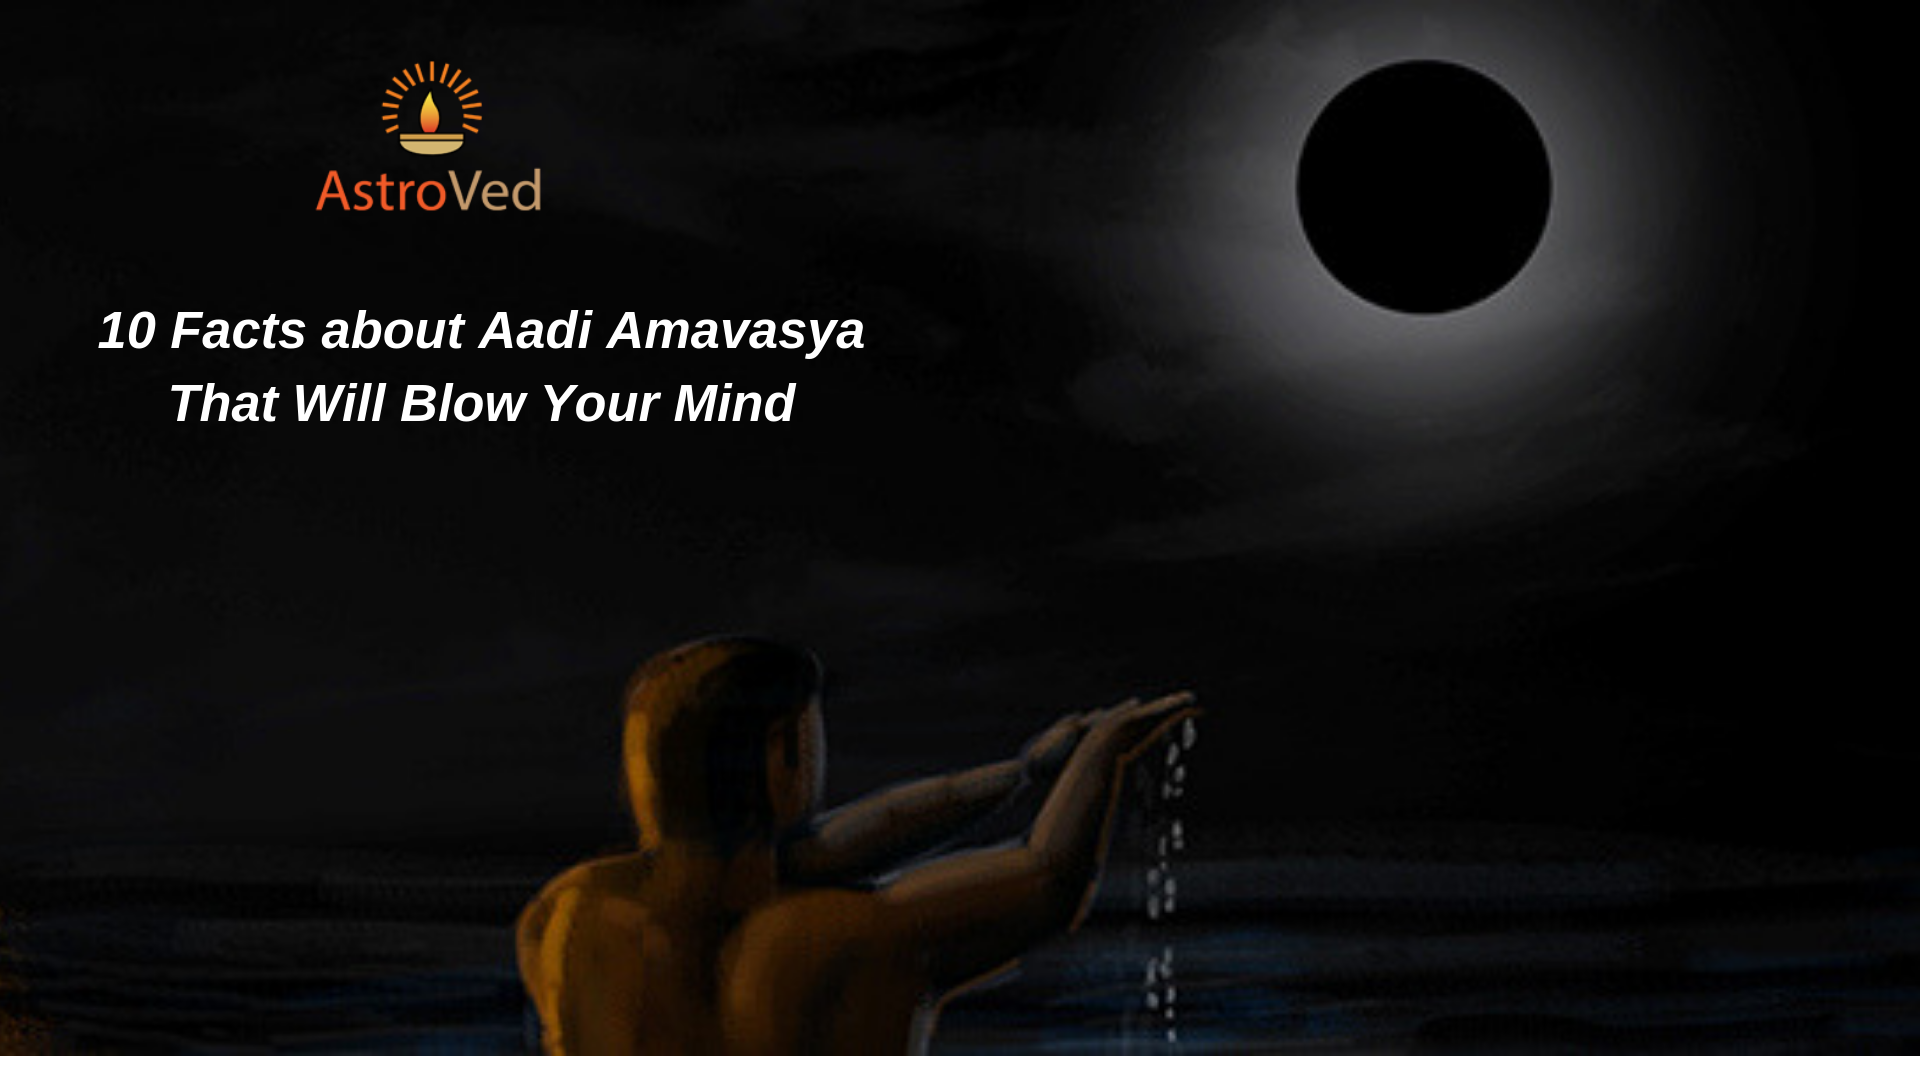 10 Facts about Aadi Amavasya That Will Blow Your Mind